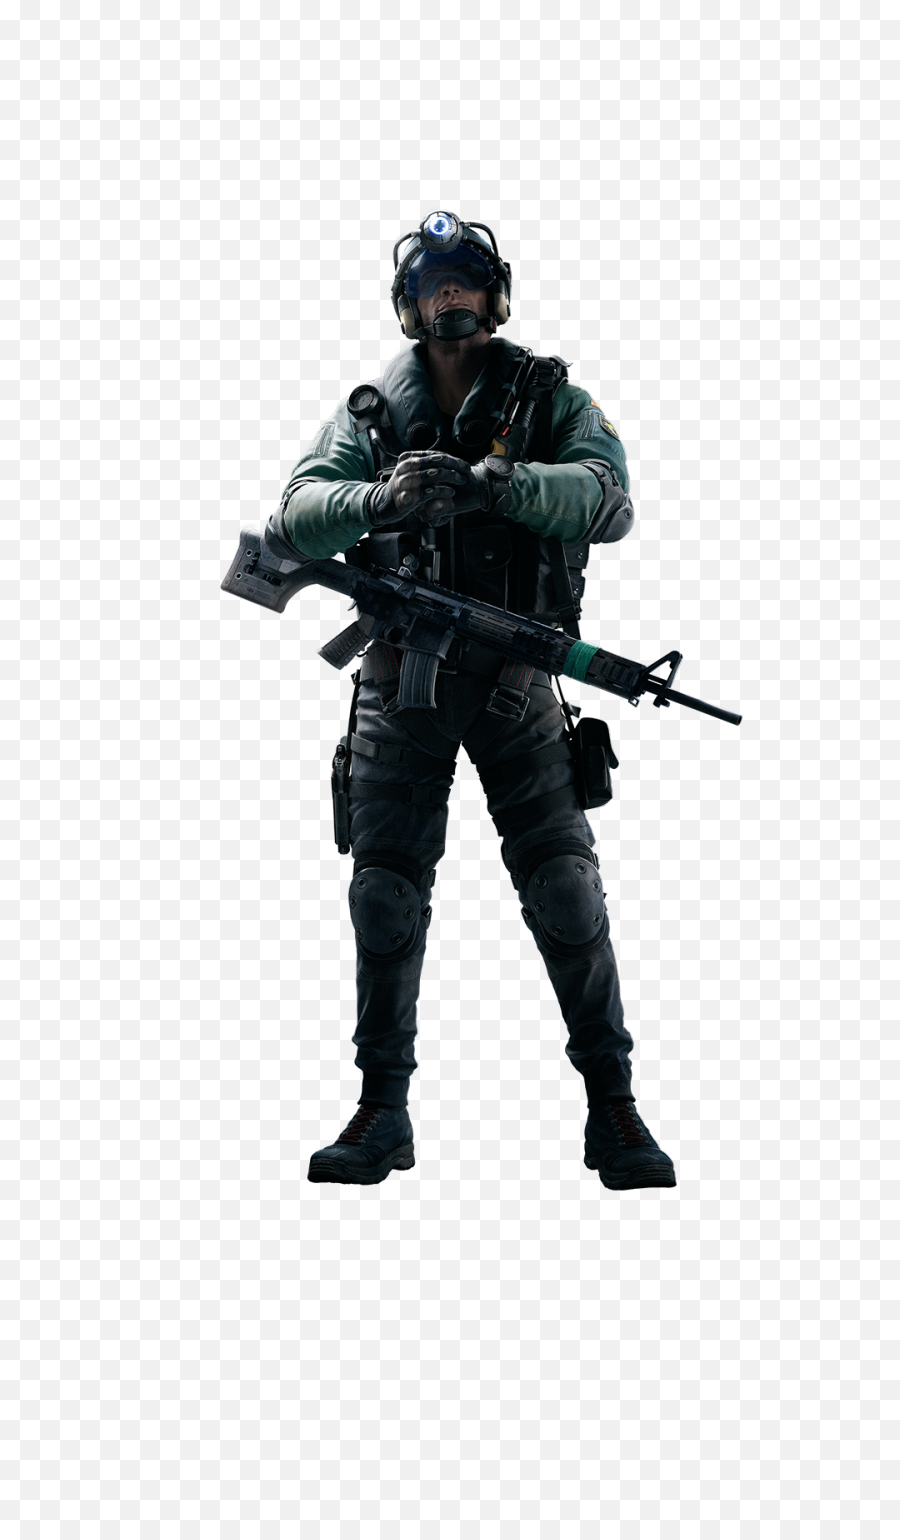 Rainbow Six Siege Characters - Black Panther Muscle Costume Png,Rainbow Six Siege Transparent